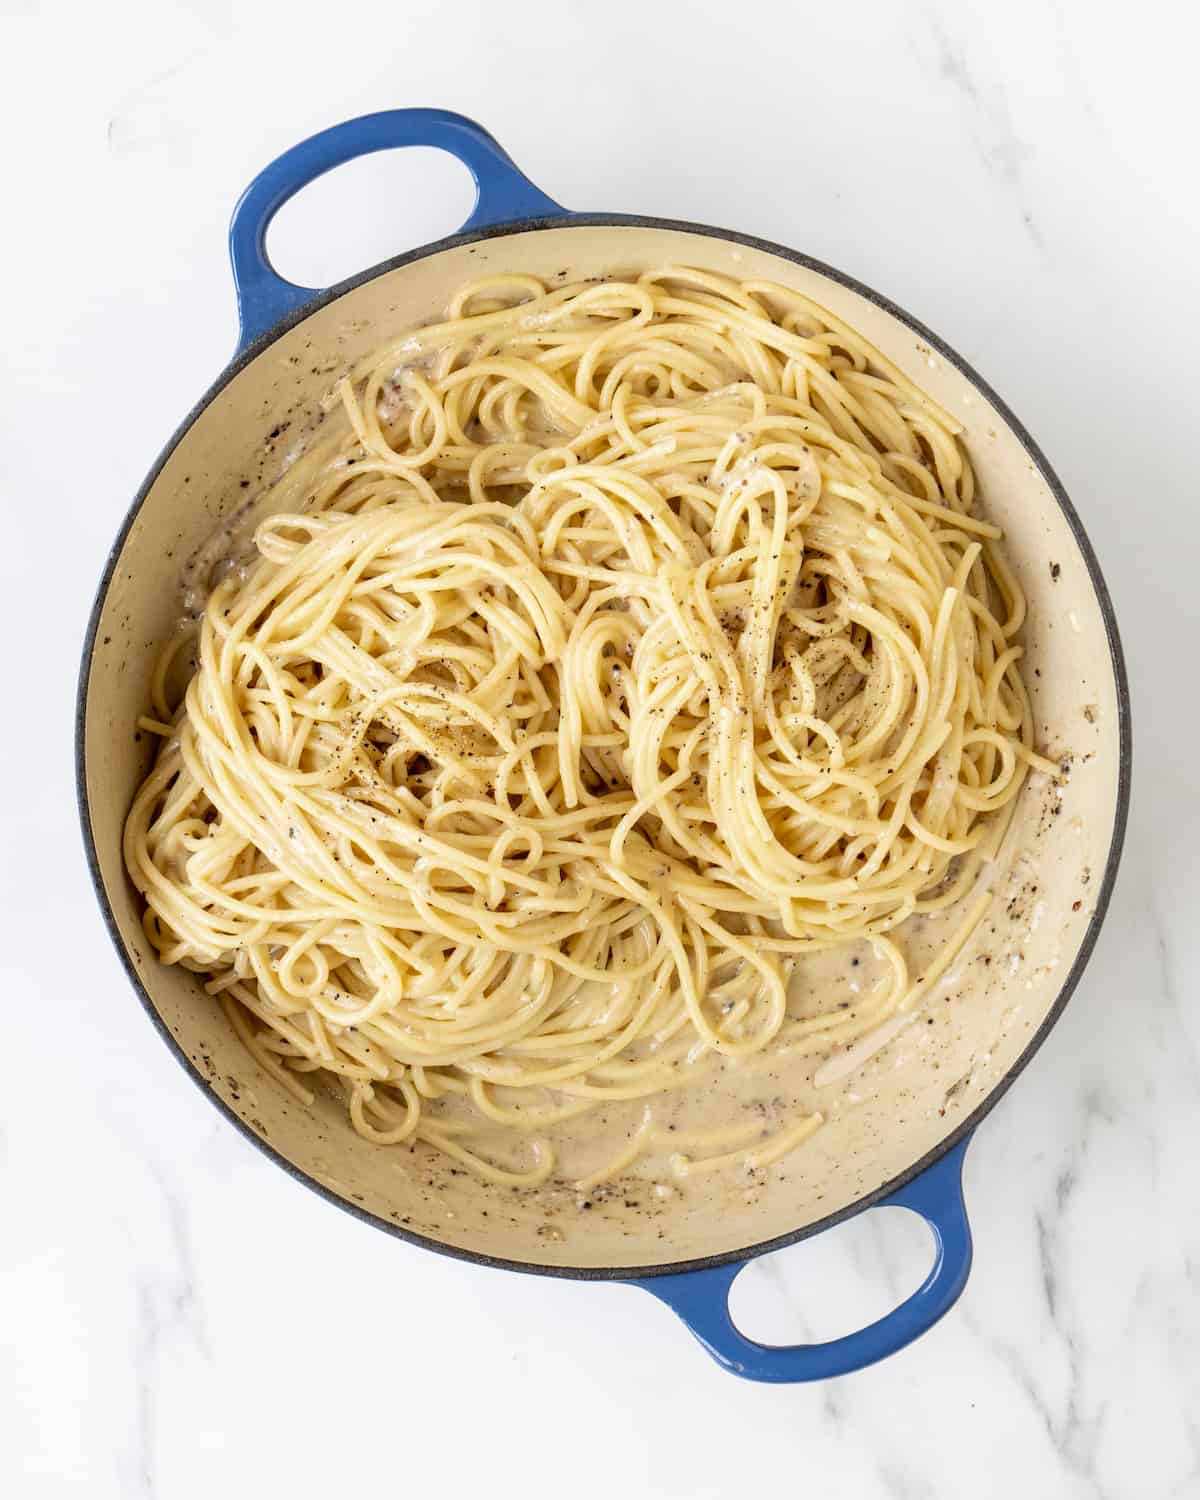 The final prepped dish of cacio e pepe in a large skillet.  